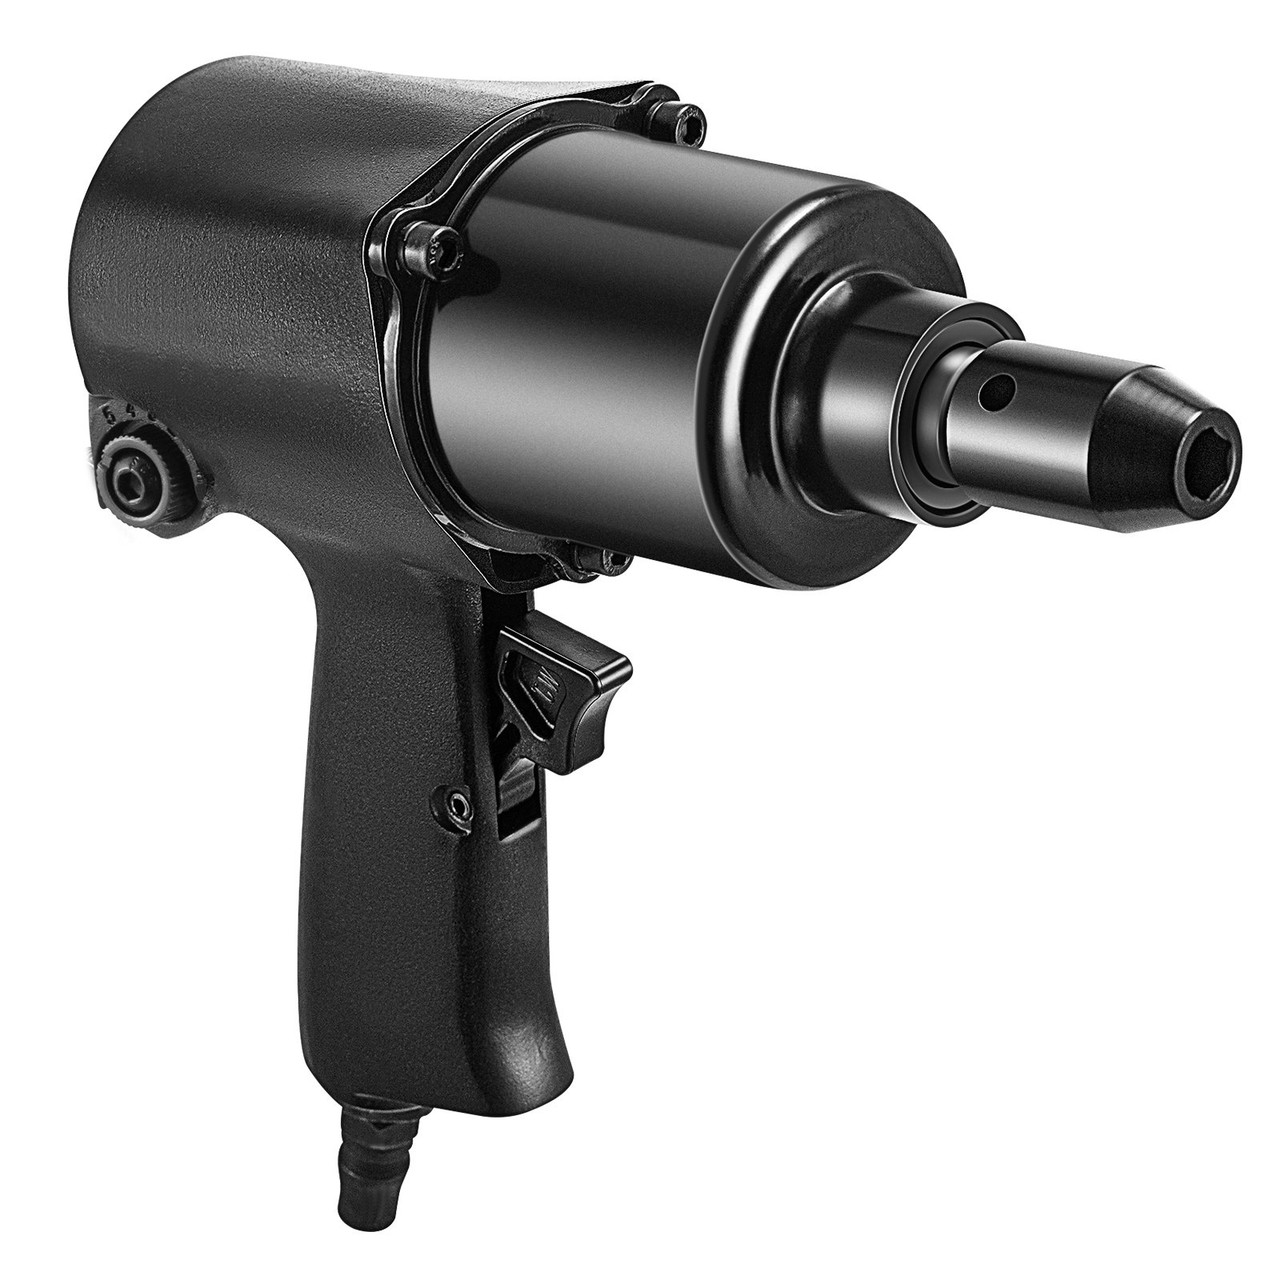 VEVOR Air Impact Wrench, 1/2" Pneumatic Impact Wrench, 660Nm Air Impact Driver, 487ft-lbs 5-Speed Control Air Impact Driver, Heavy Duty for Car Tire Rotation and Removal